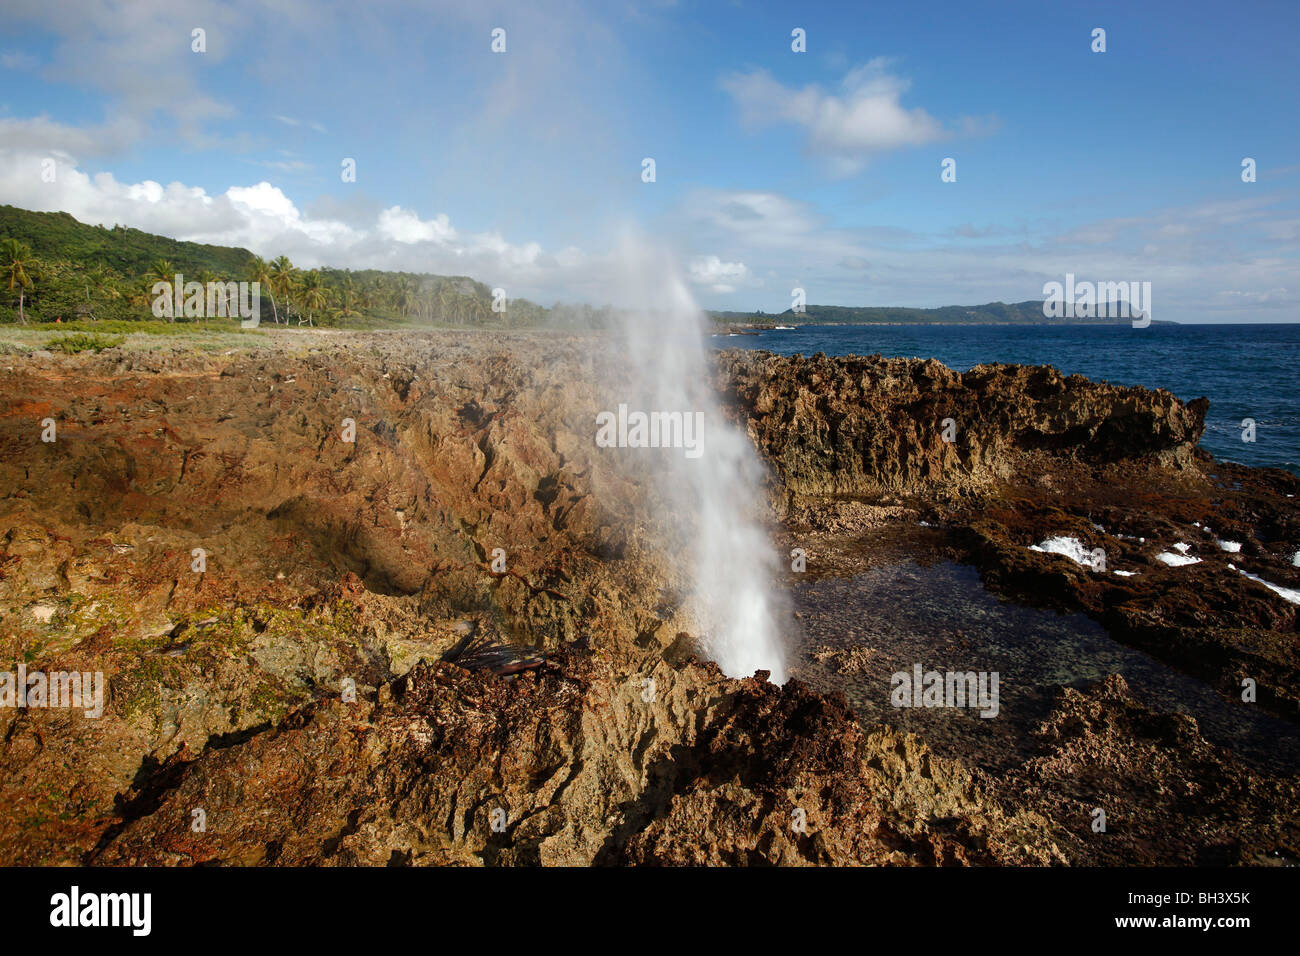 A blow hole on the coast of fossilized coral, Samana peninsula, Dominican Republic Stock Photo